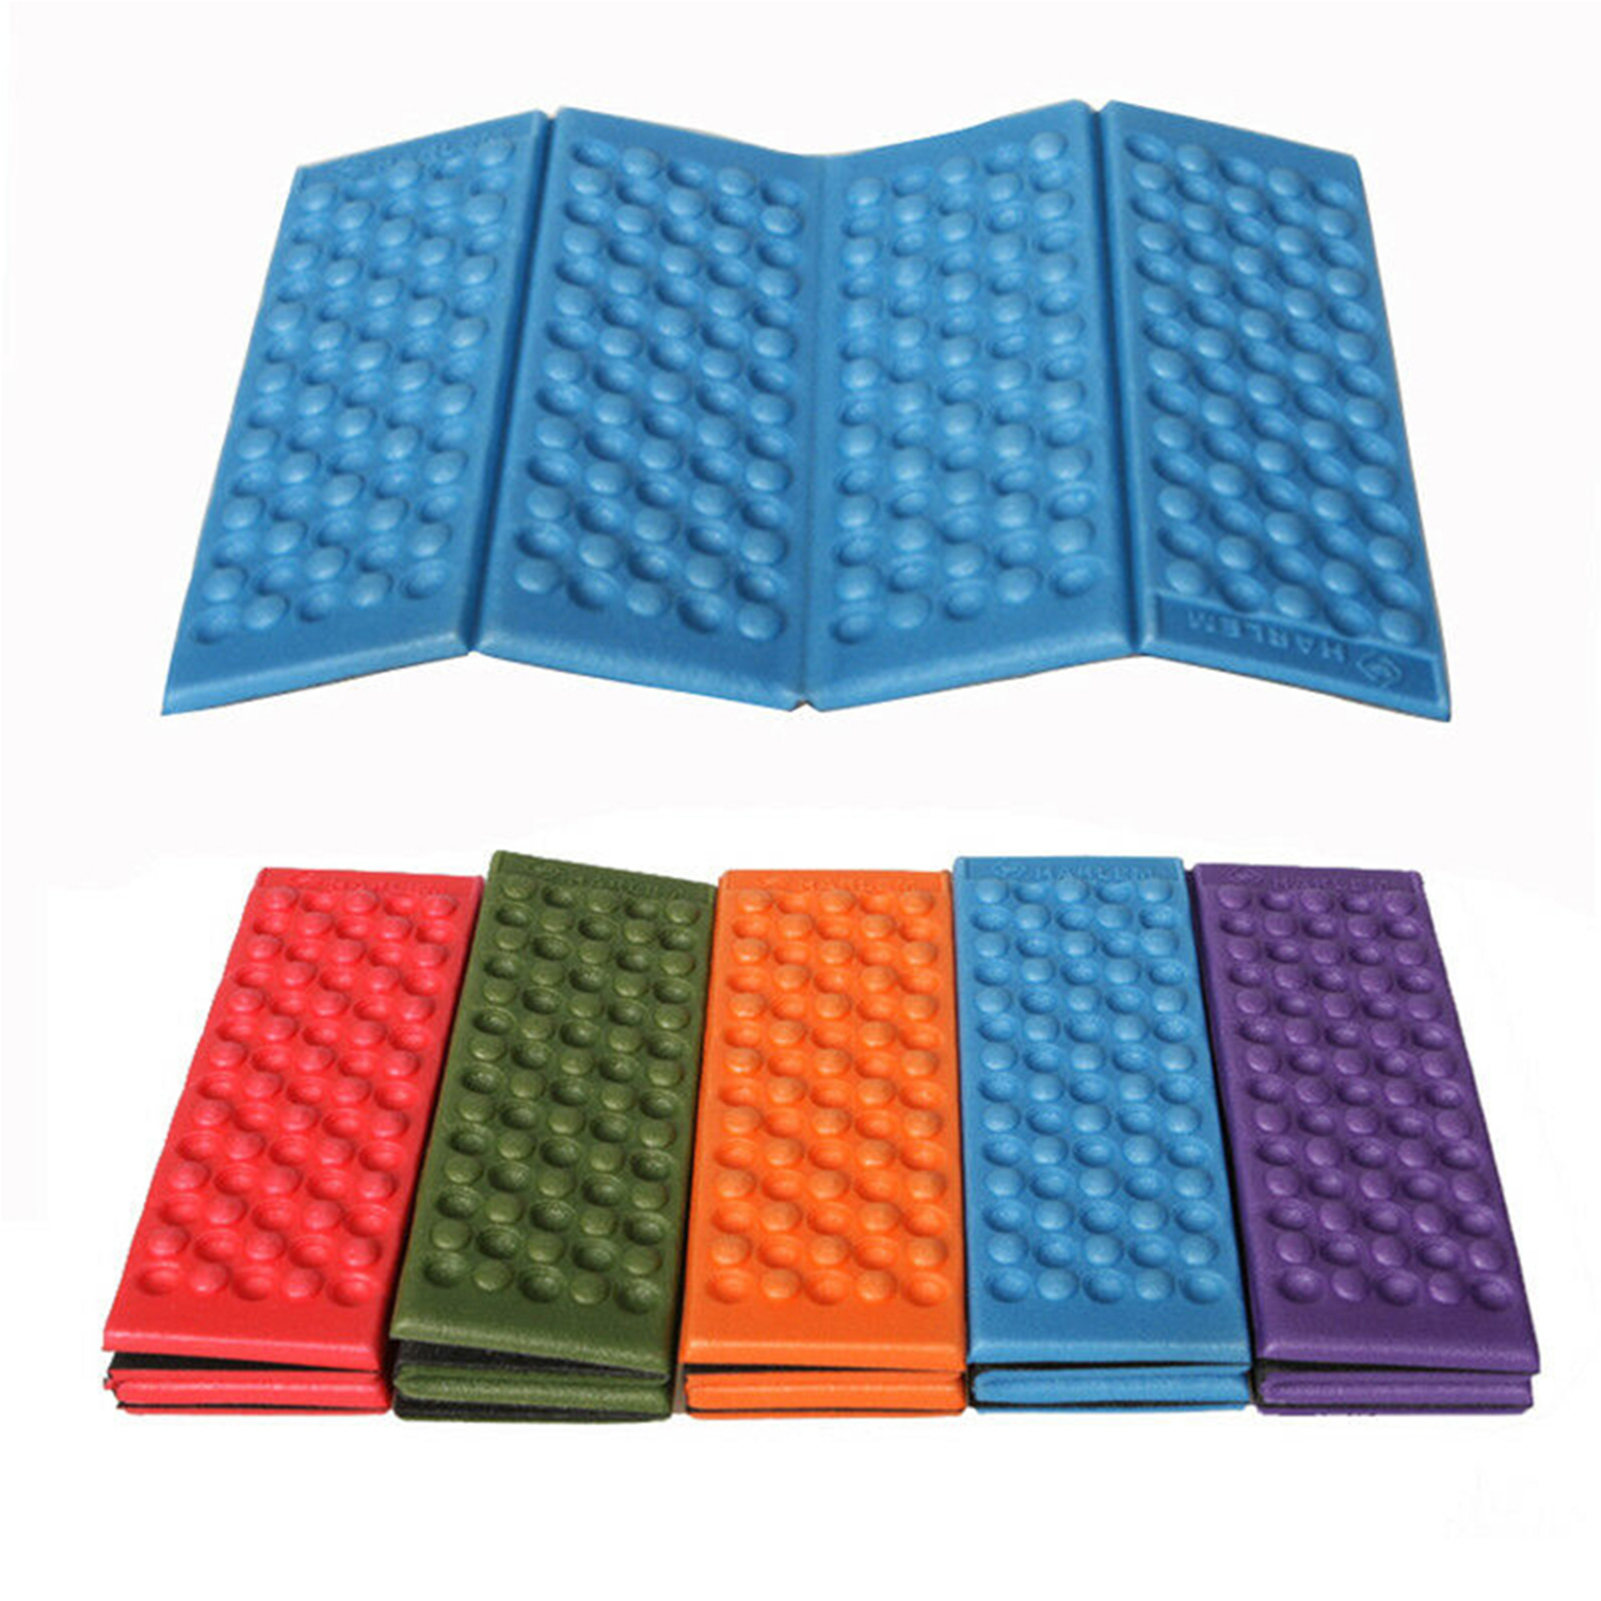 SPRING PARK Portable Lightweight Waterproof Folding Mat, Foldable Foam Sitting Pad for Outdoor Activities, Kneeling and Seat Cushion Chair Picnic Mat - image 1 of 6